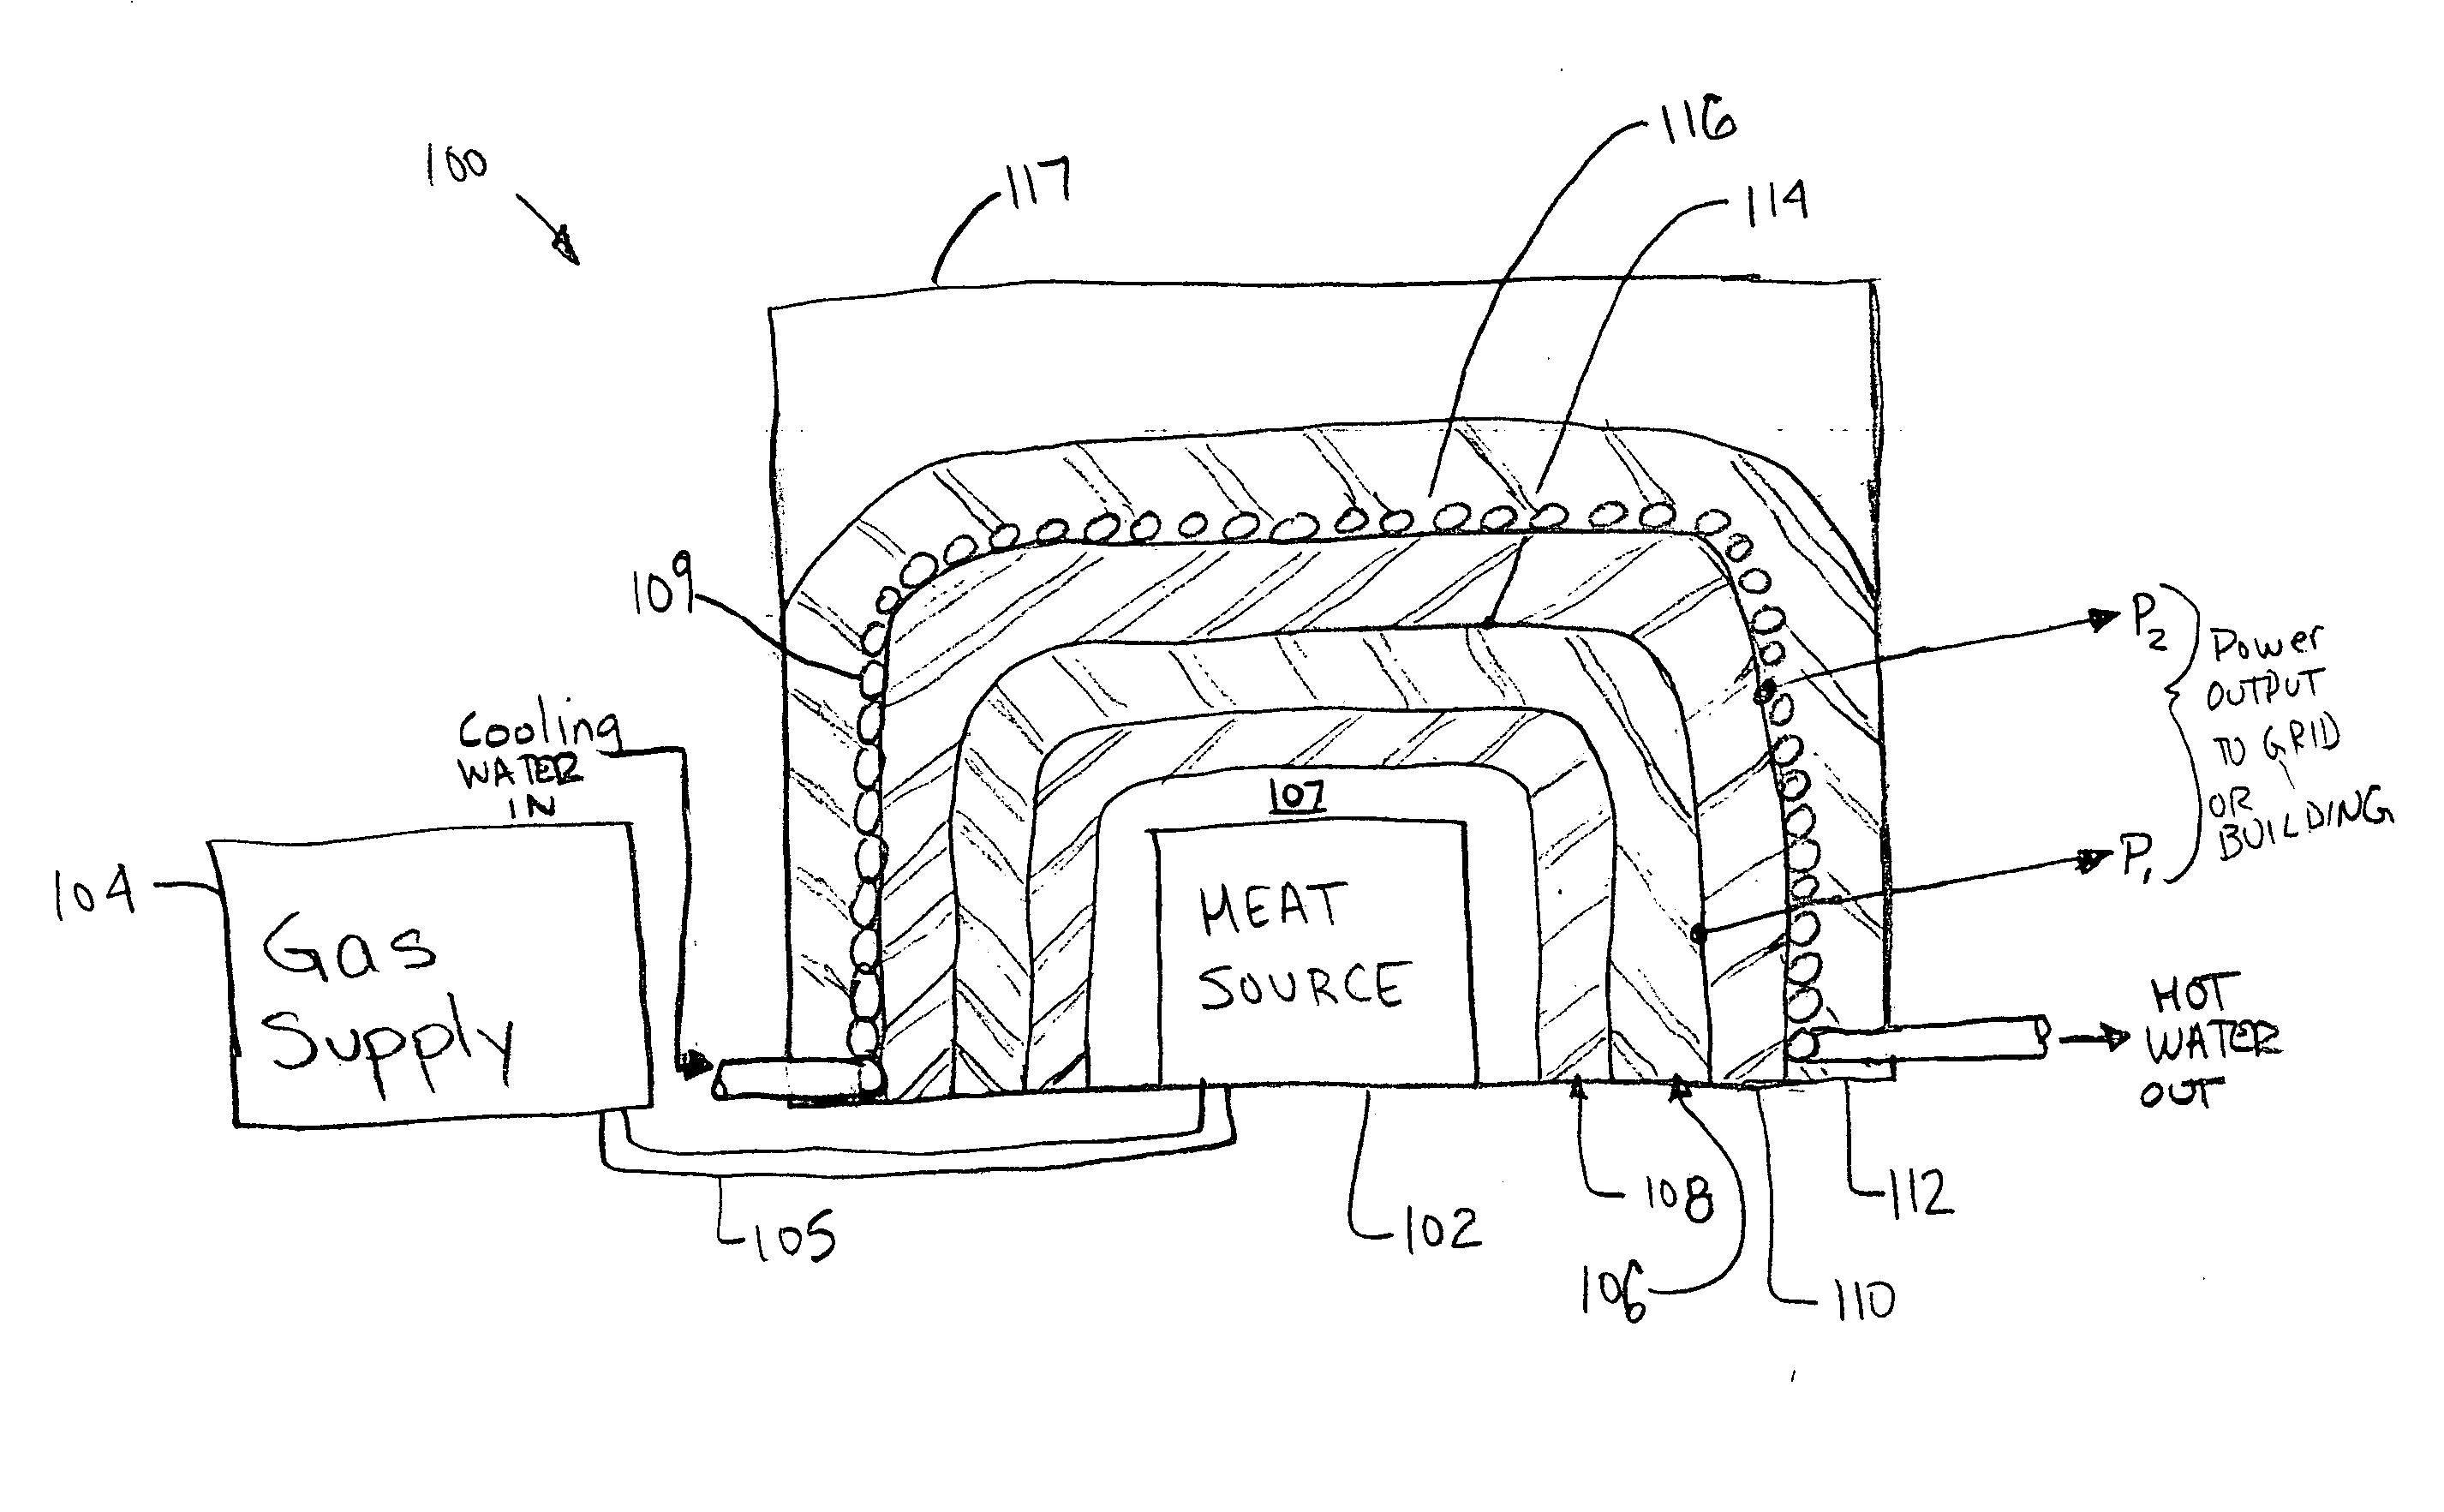 Method and devices for generating energy from photovoltaics and temperature differentials